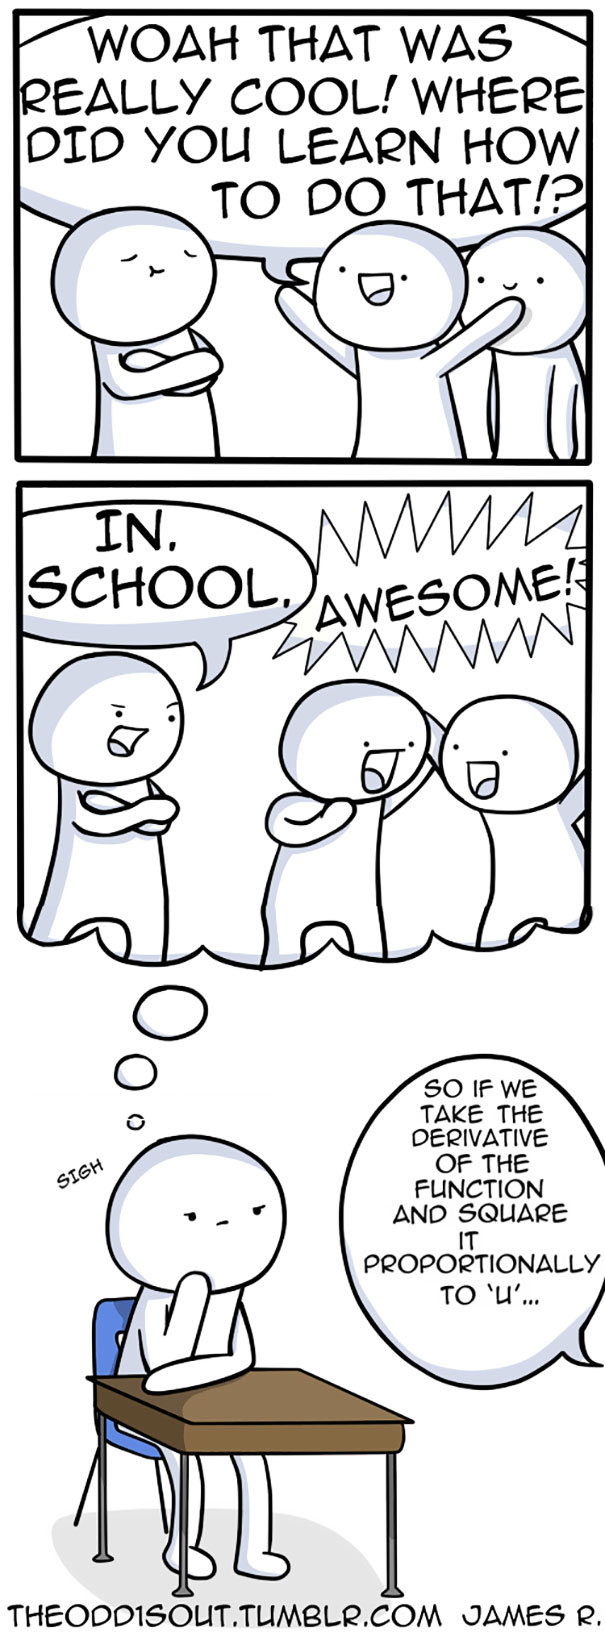 Tumblr Theodd1sout Comics Trending Now 71 Funny And Sometimes